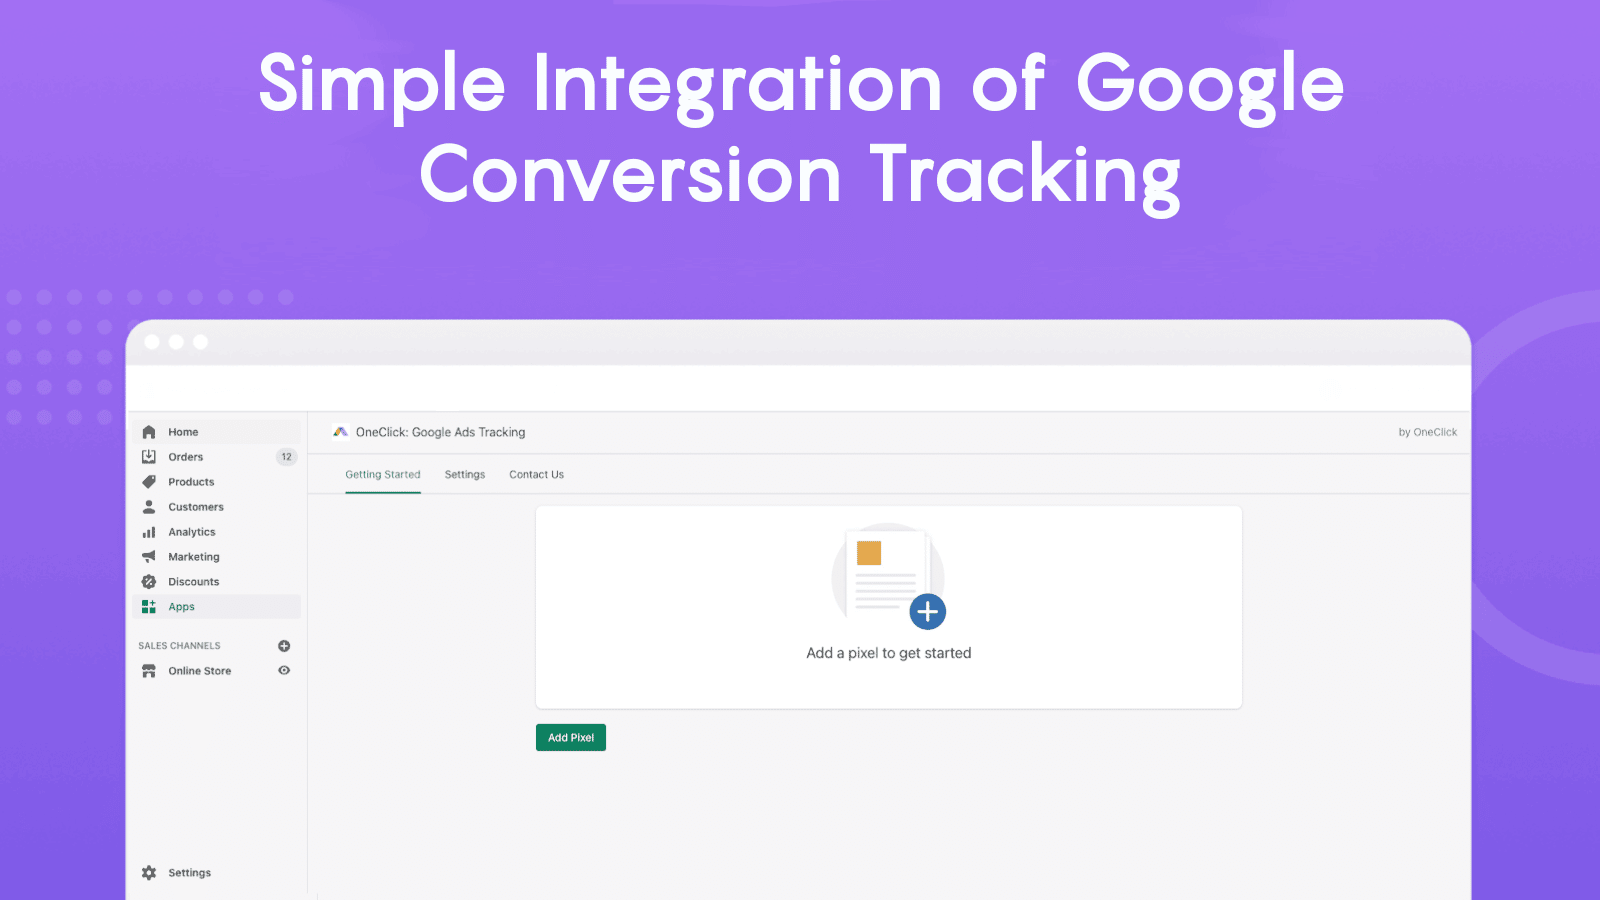 OneClick: Google Ads Tracking